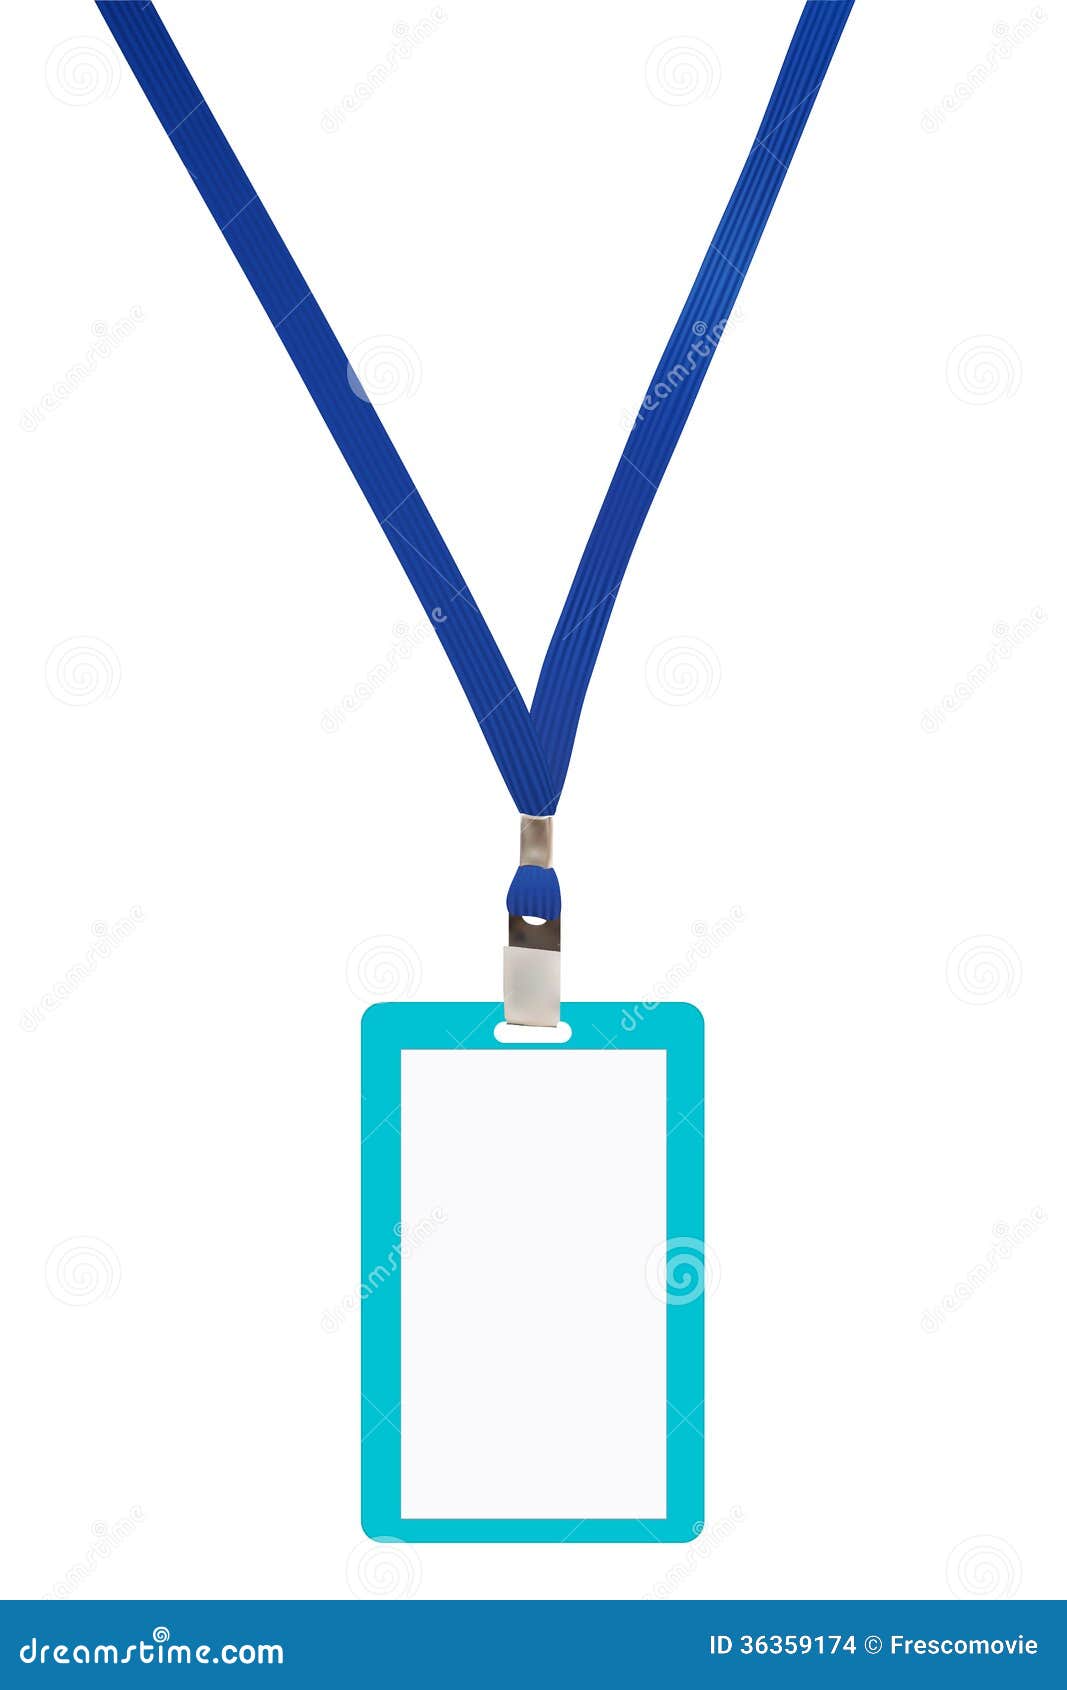 blank badge with blue neckband.